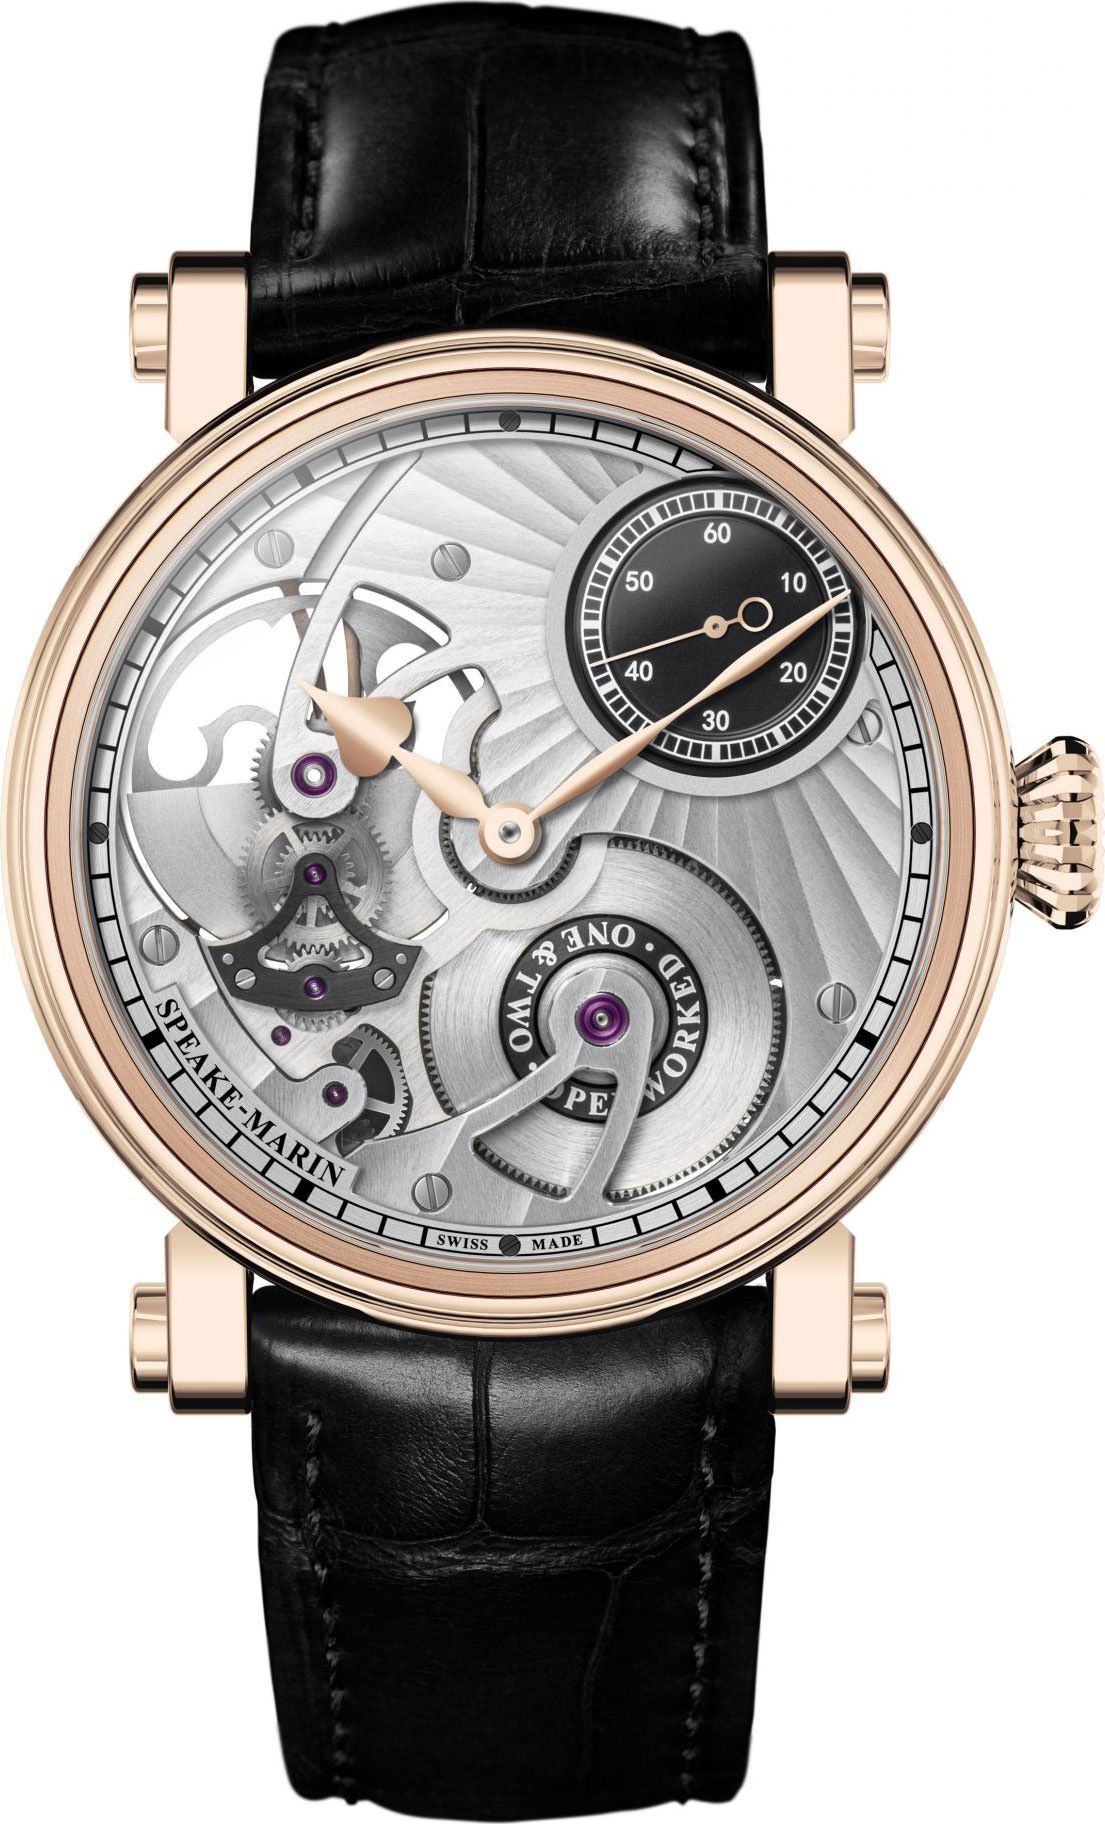 Speake-Marin One & Two Openworked Skeleton Dial 38 mm Automatic Watch For Men - 1